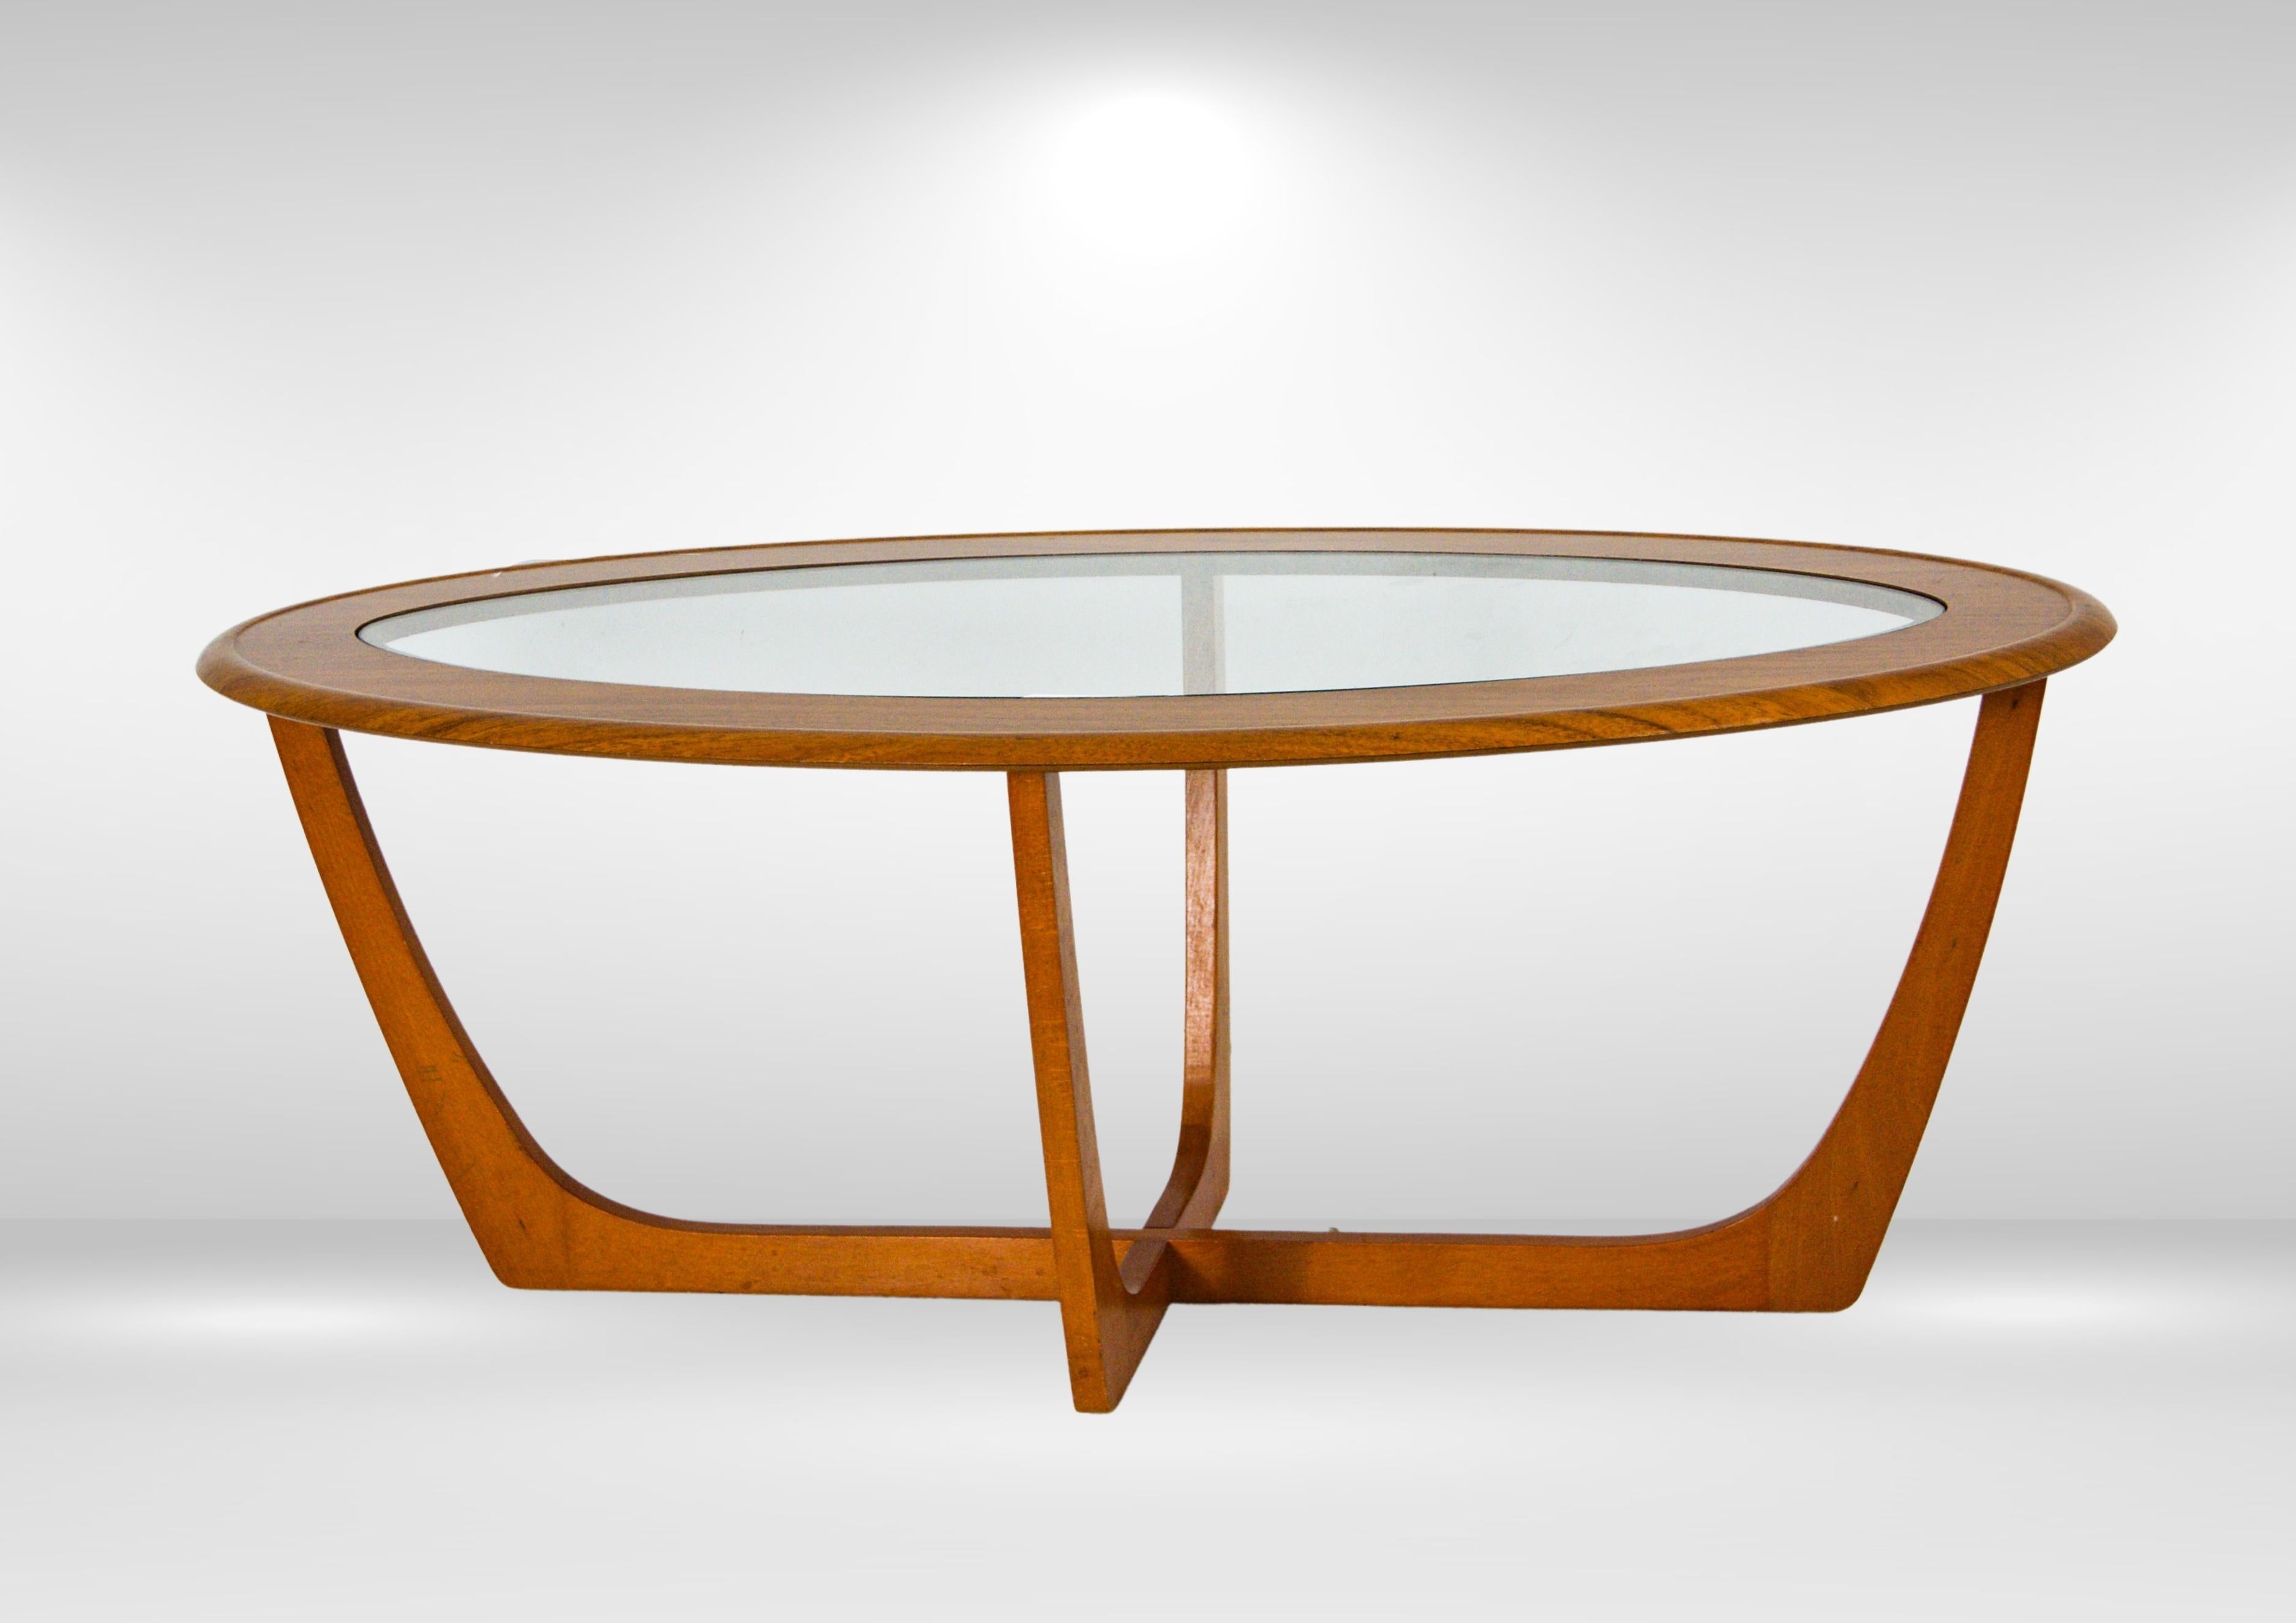 Vintage 1970s oval shaped glass and teak coffee table.
British design in the style of a G Plan 'Astro coffee table'.
Solid teak base, with a teak veneer to the top.
The slim oval glass top sits inset on the solid teak base.

In very good